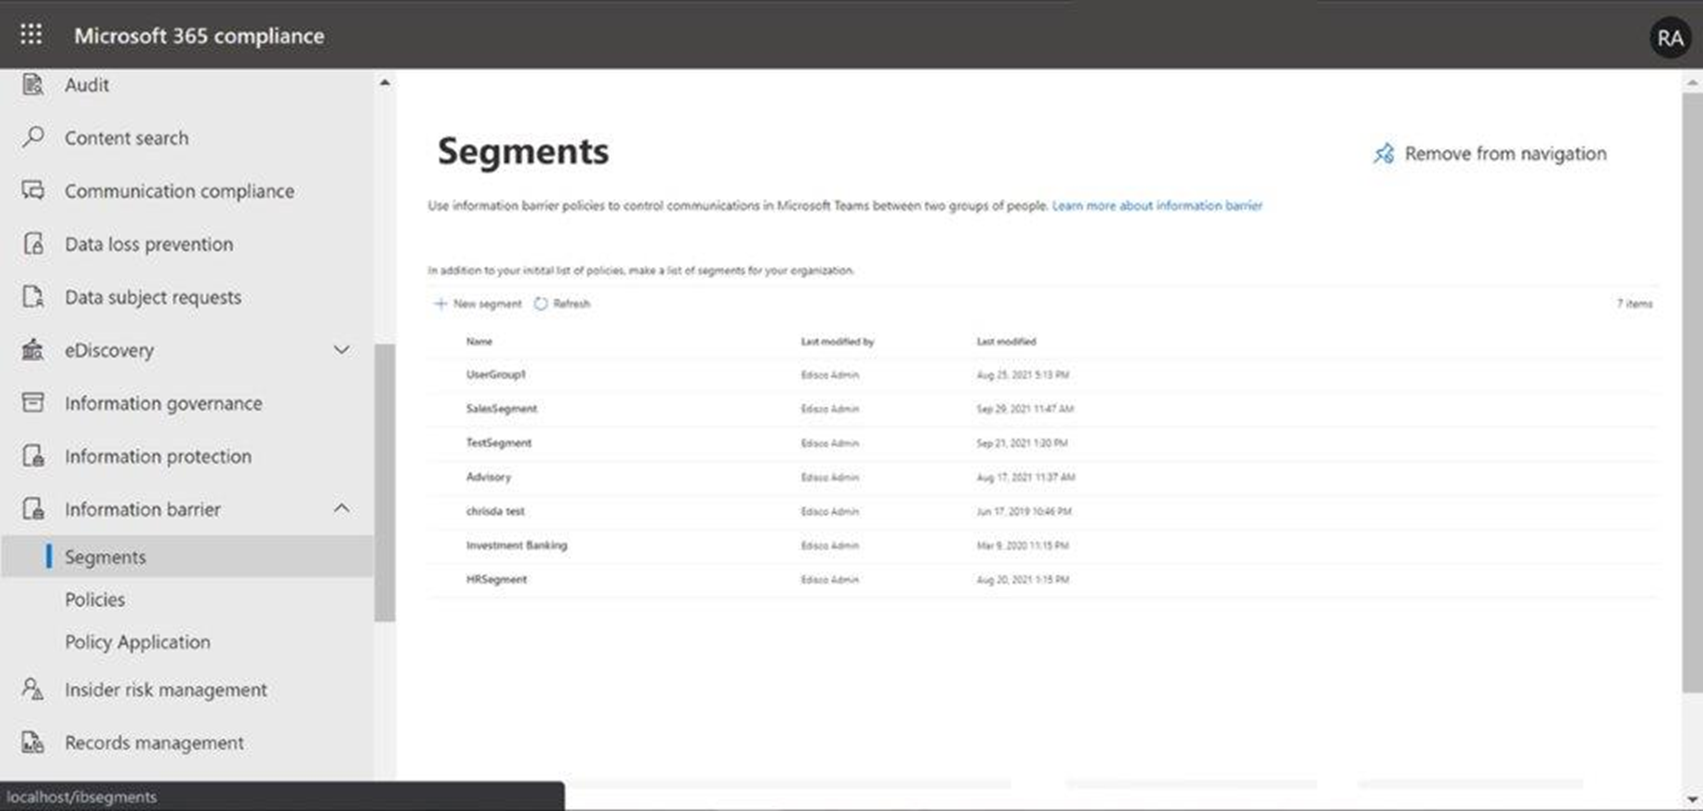 From the new Segments landing page, you can create and manage a list of segments for your organization.